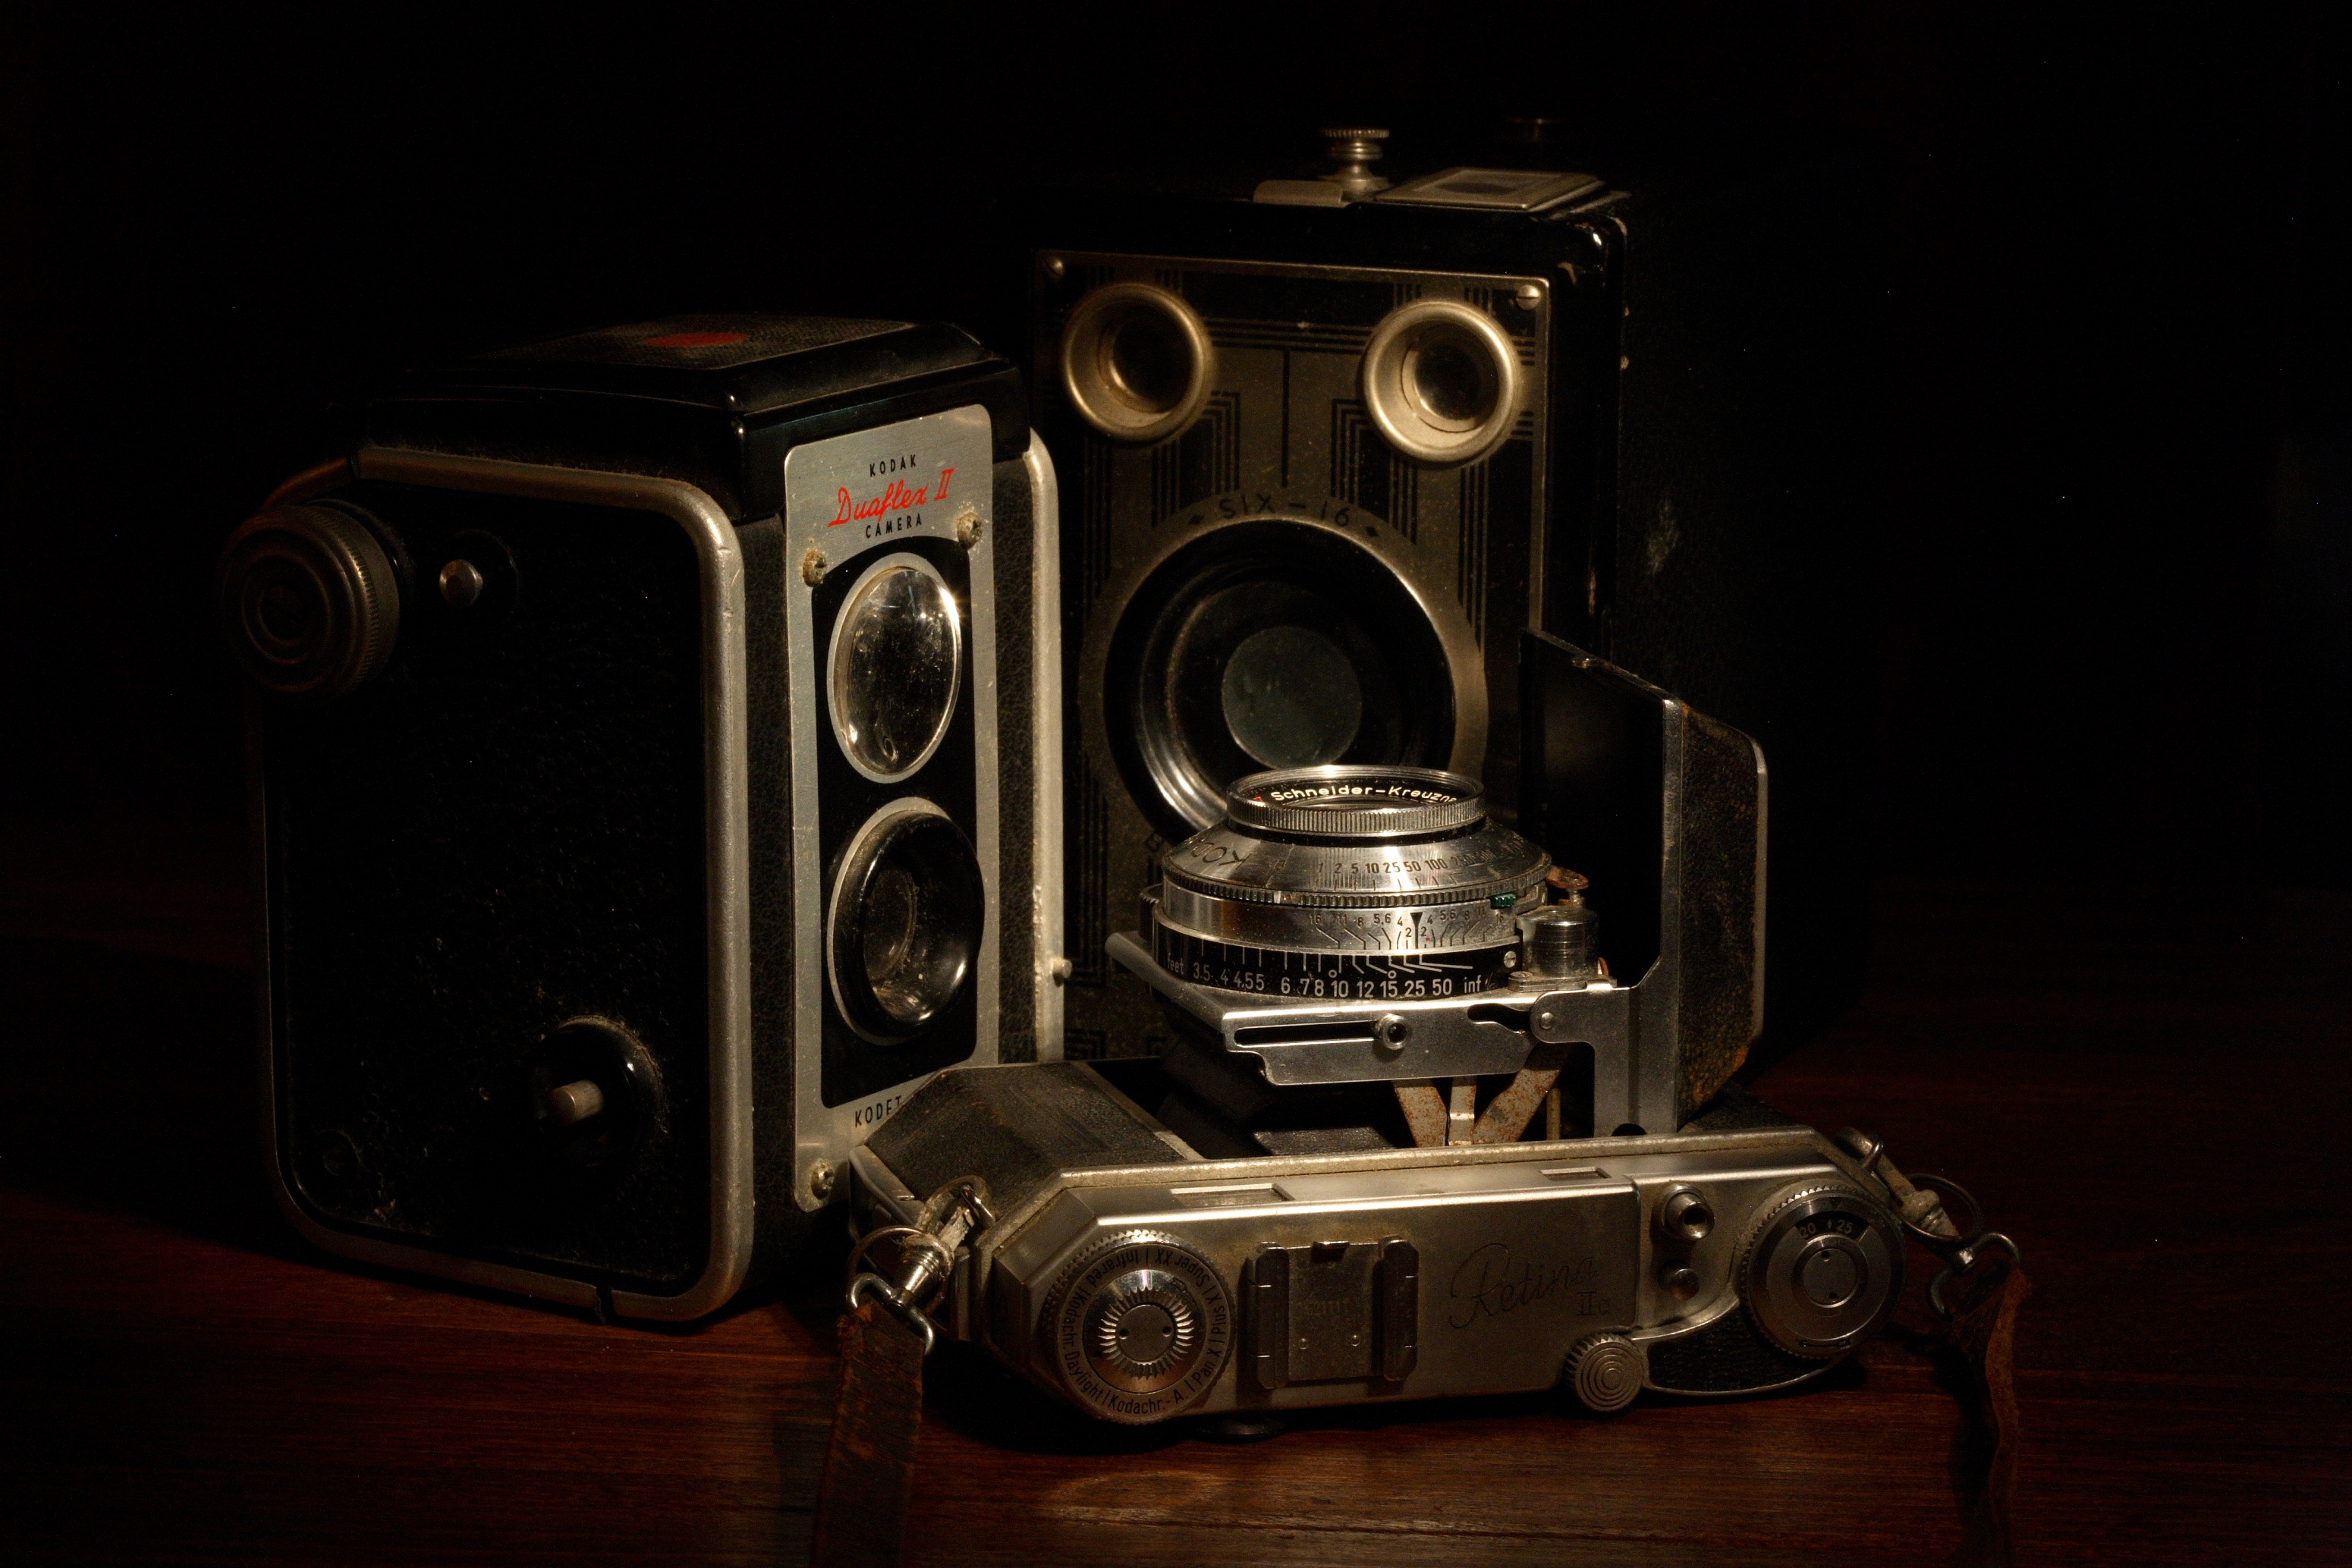 File:Antique Cameras.jpg - Wikimedia Commons